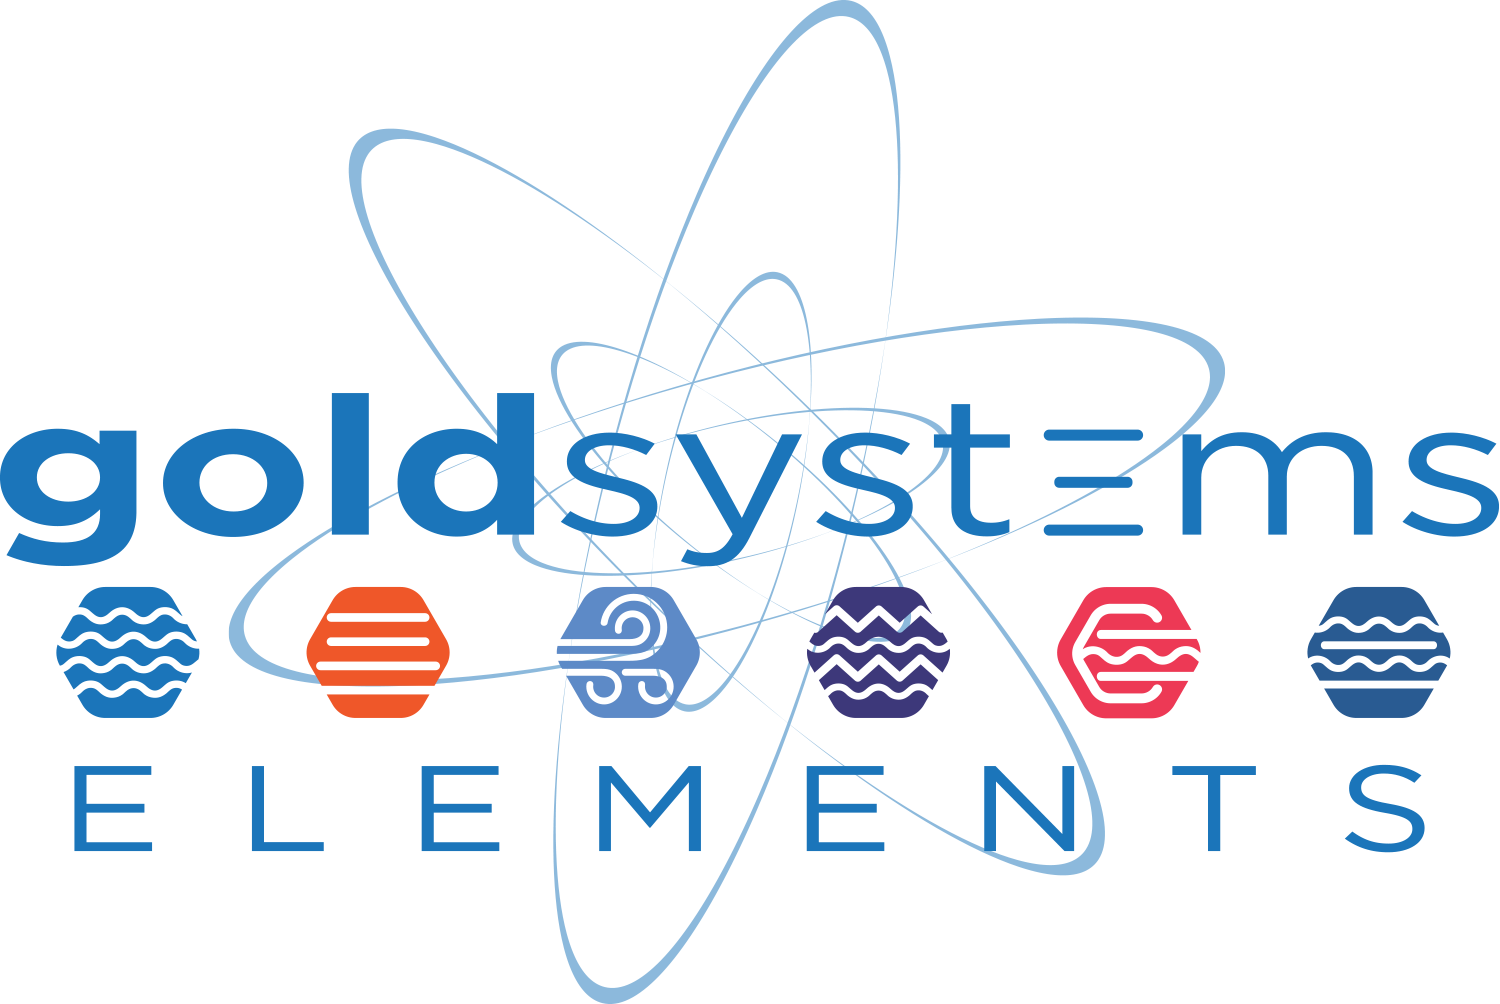 Gold Systems, ELEMENTS